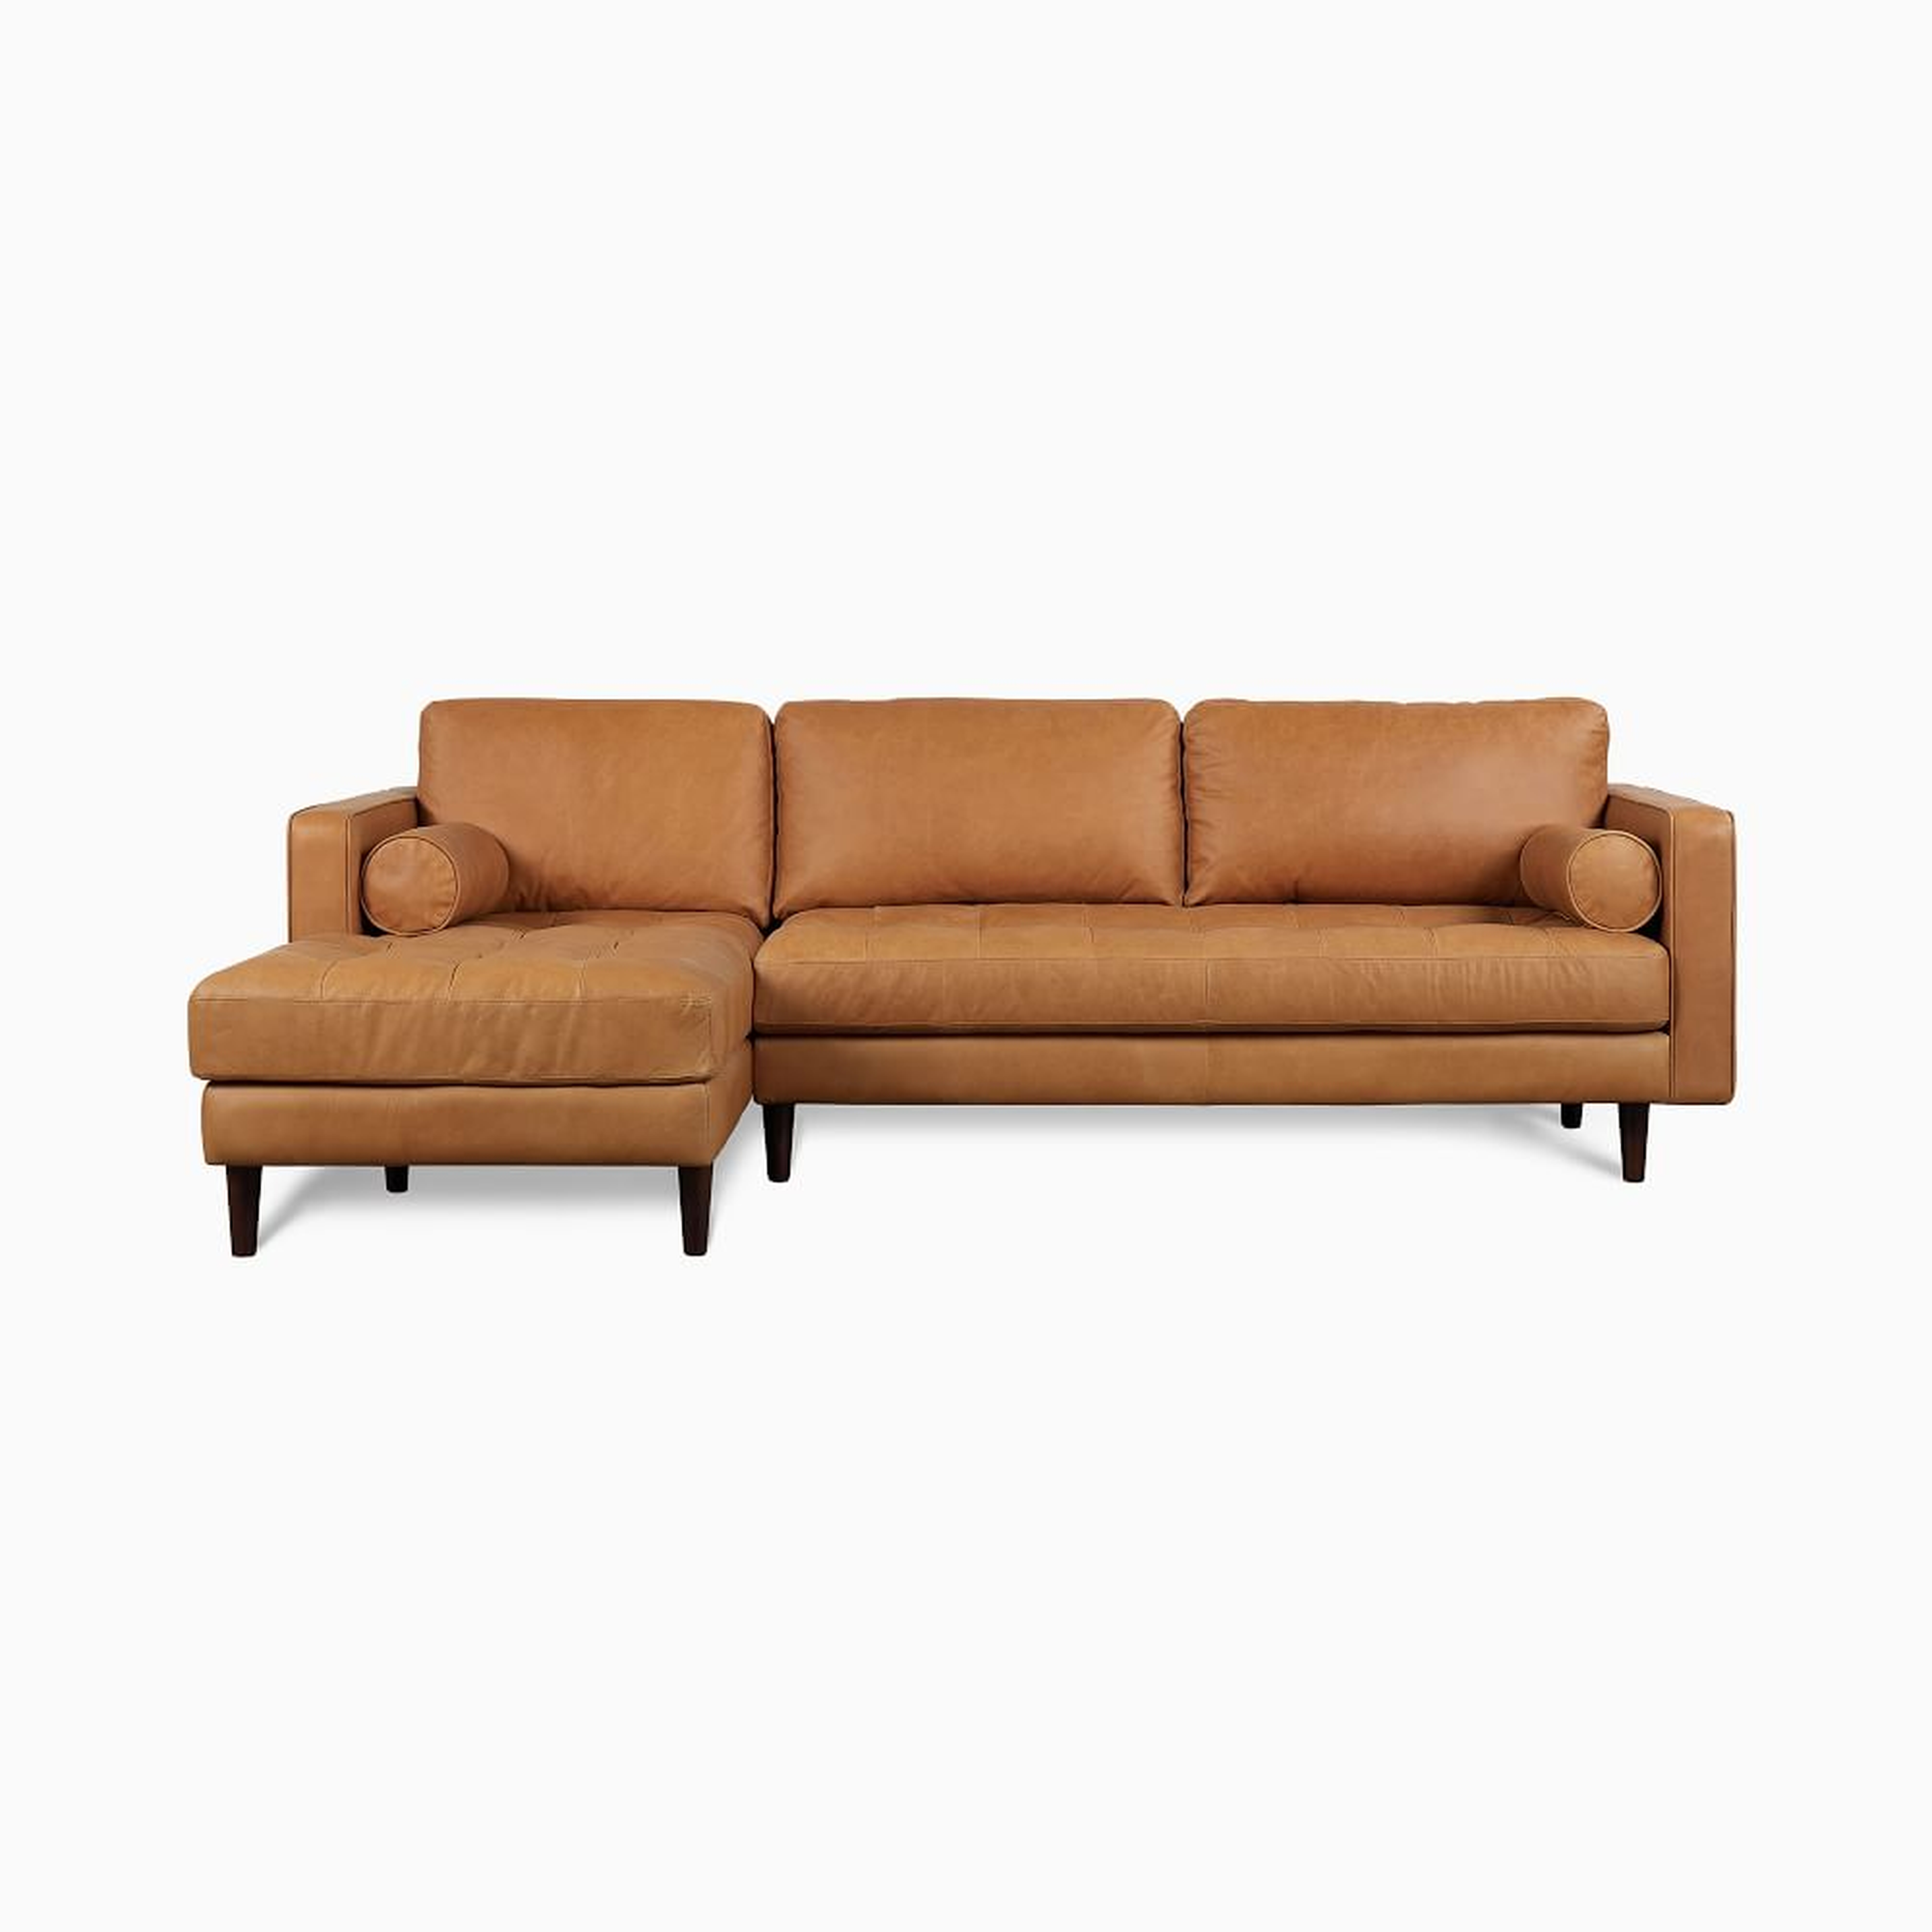 Dennes 102" Leather Left 2-Piece Chaise Sectional, Charme Leather, Tan, Walnut - West Elm